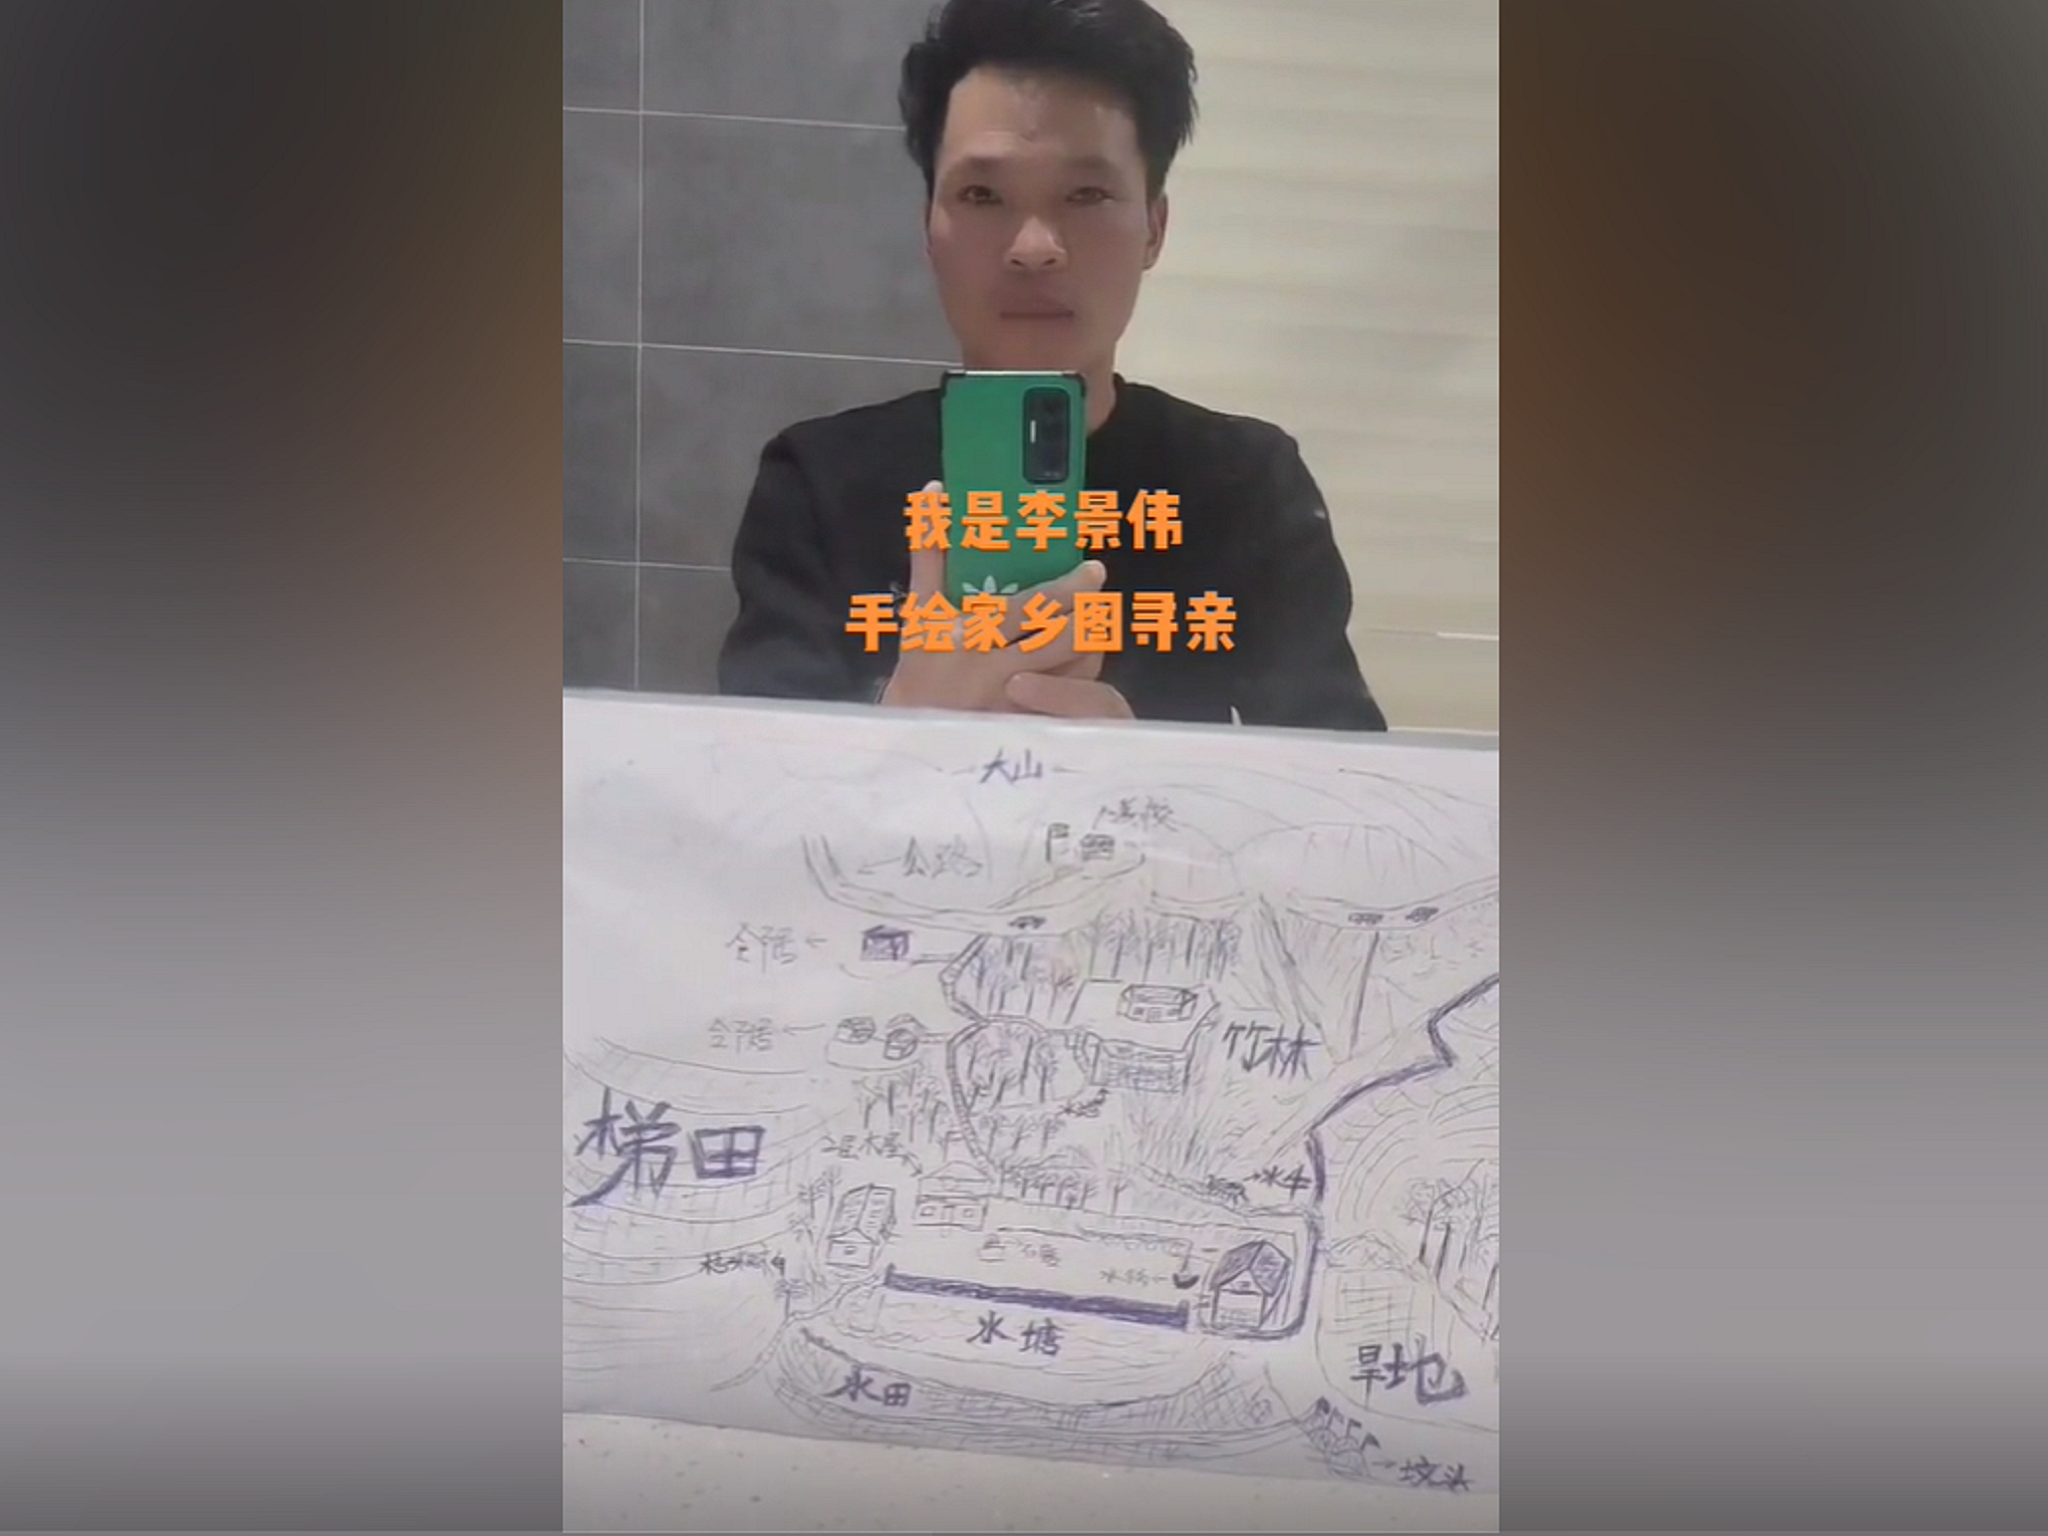 The 37-year-old posted a photo of a hand-drawn map on Douyin – China’s version of TikTok – and asked for clues about where it could be